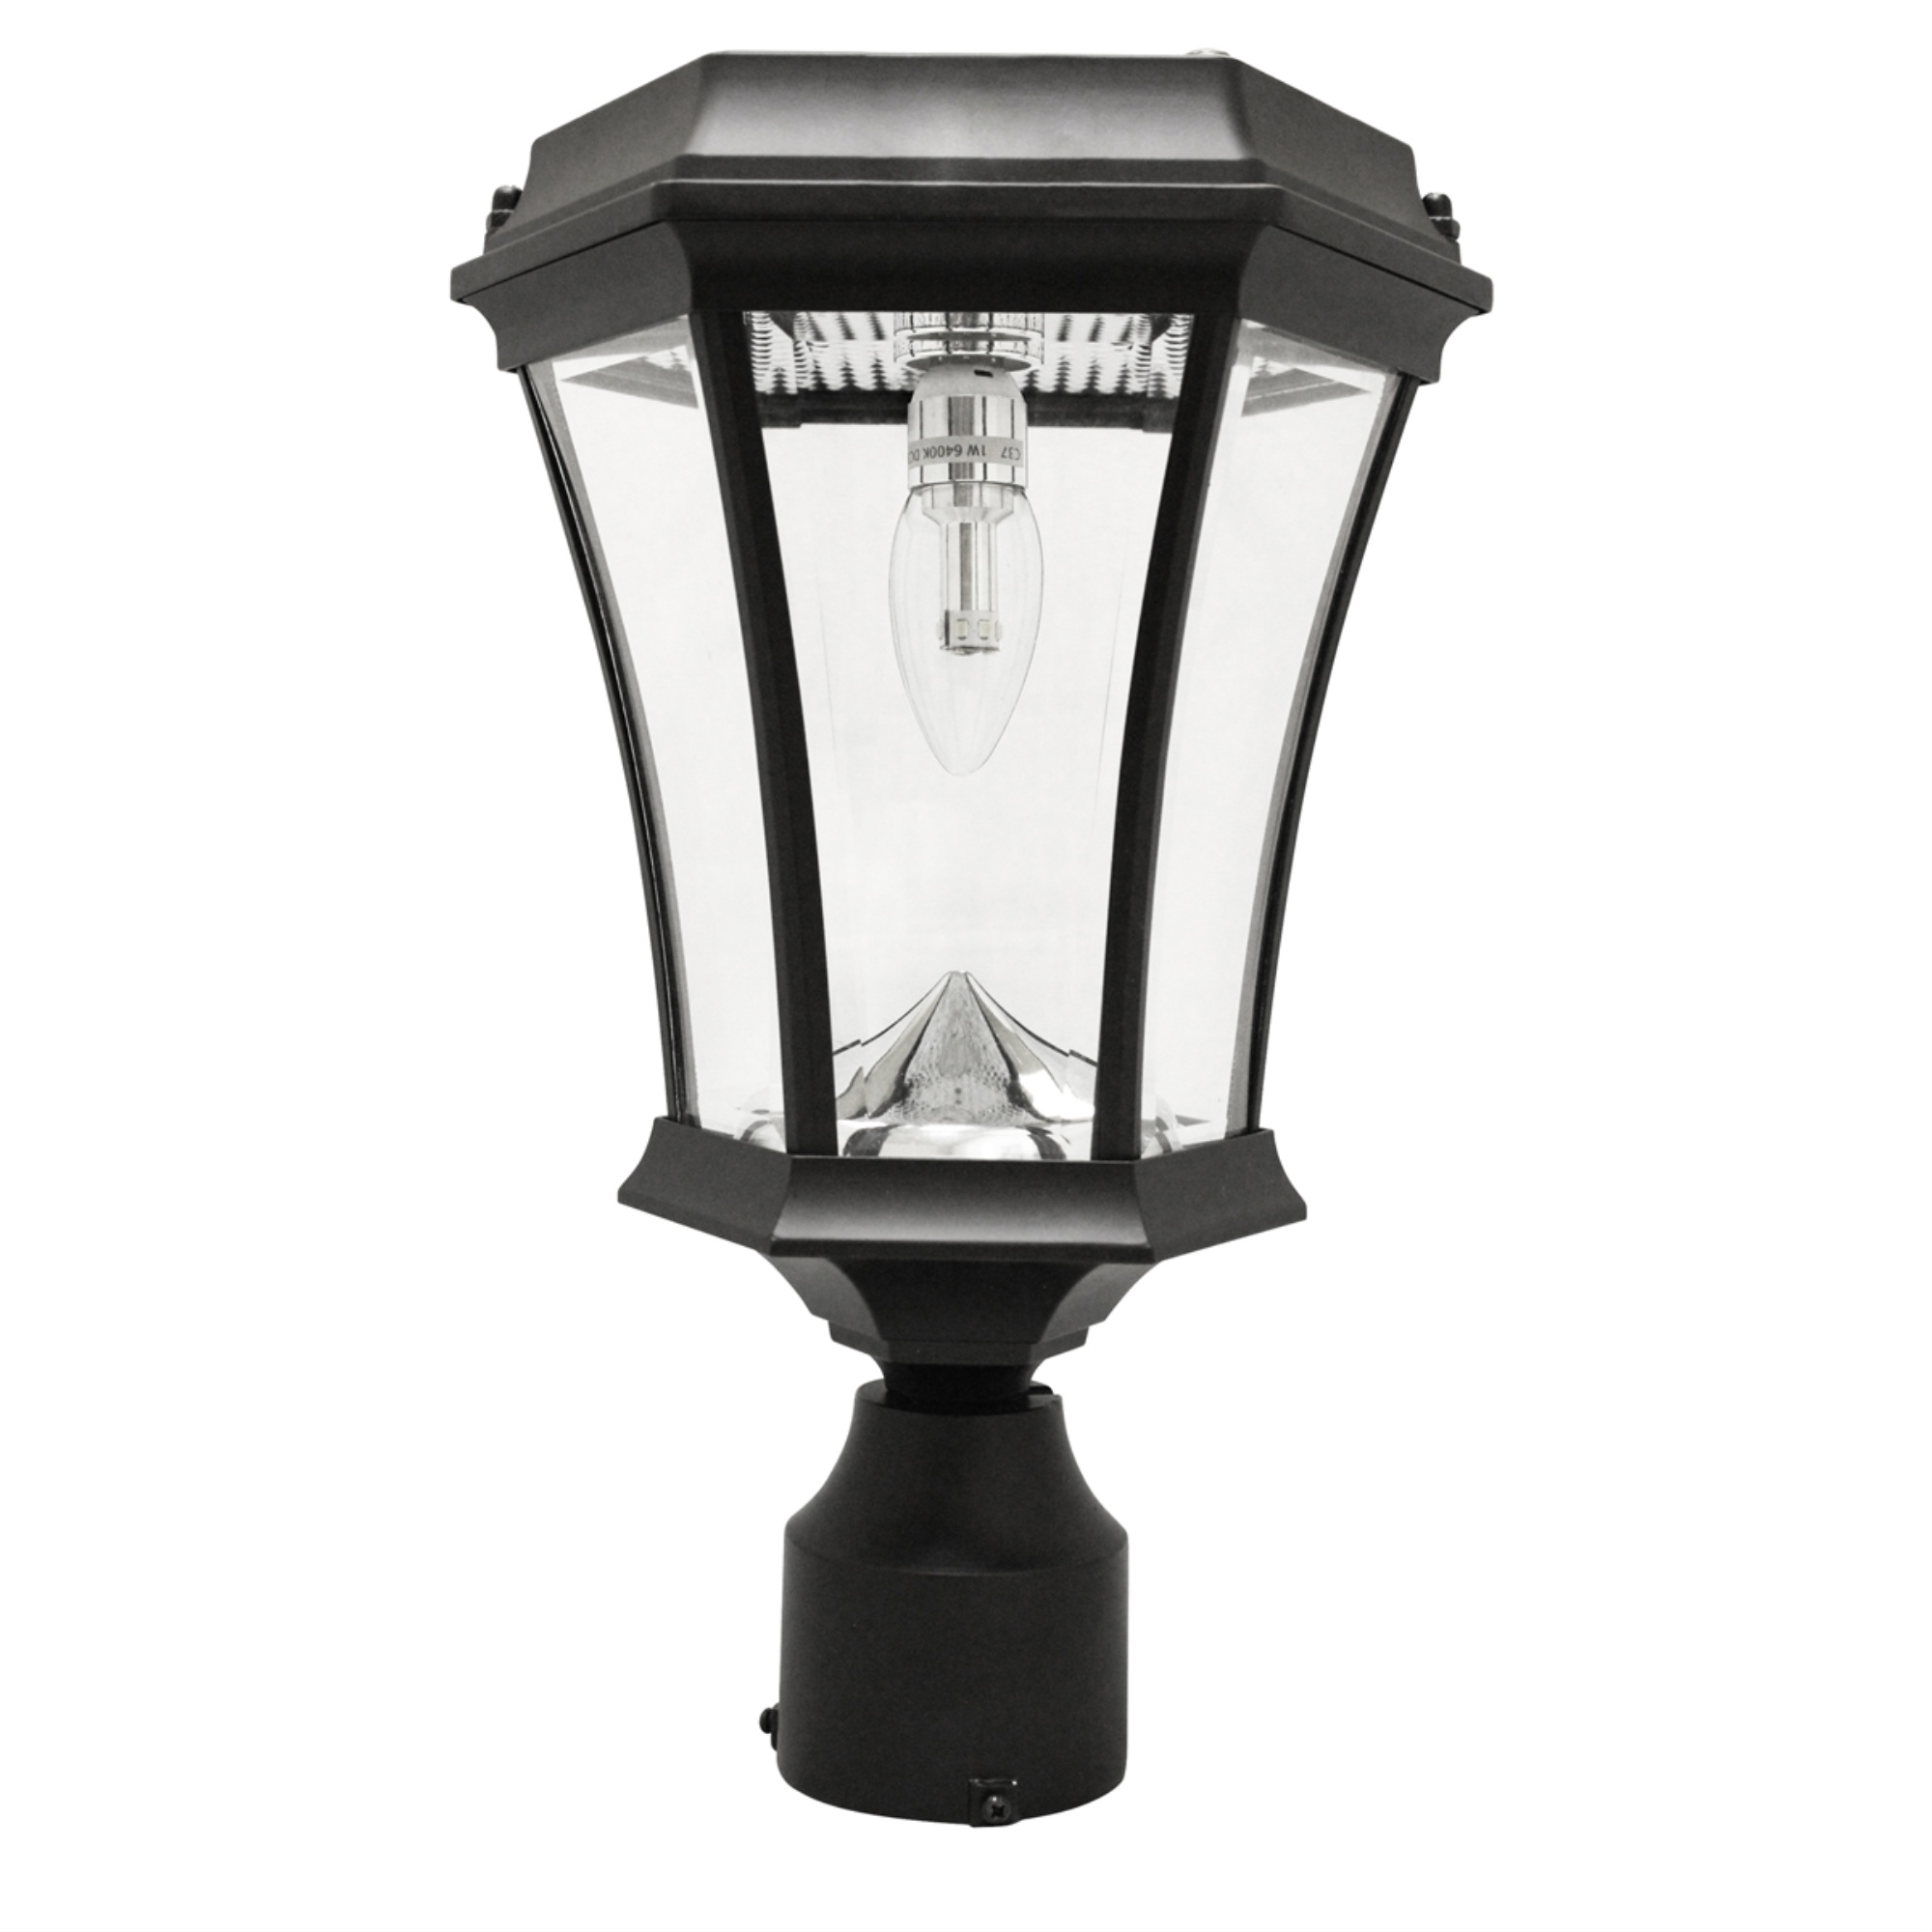 Gama Sonic Victorian Solar Outdoor LED Light Fixture, Bright-White LEDs GS-94FPW - Pole/Post/Wall Mount Kit - Black Finish